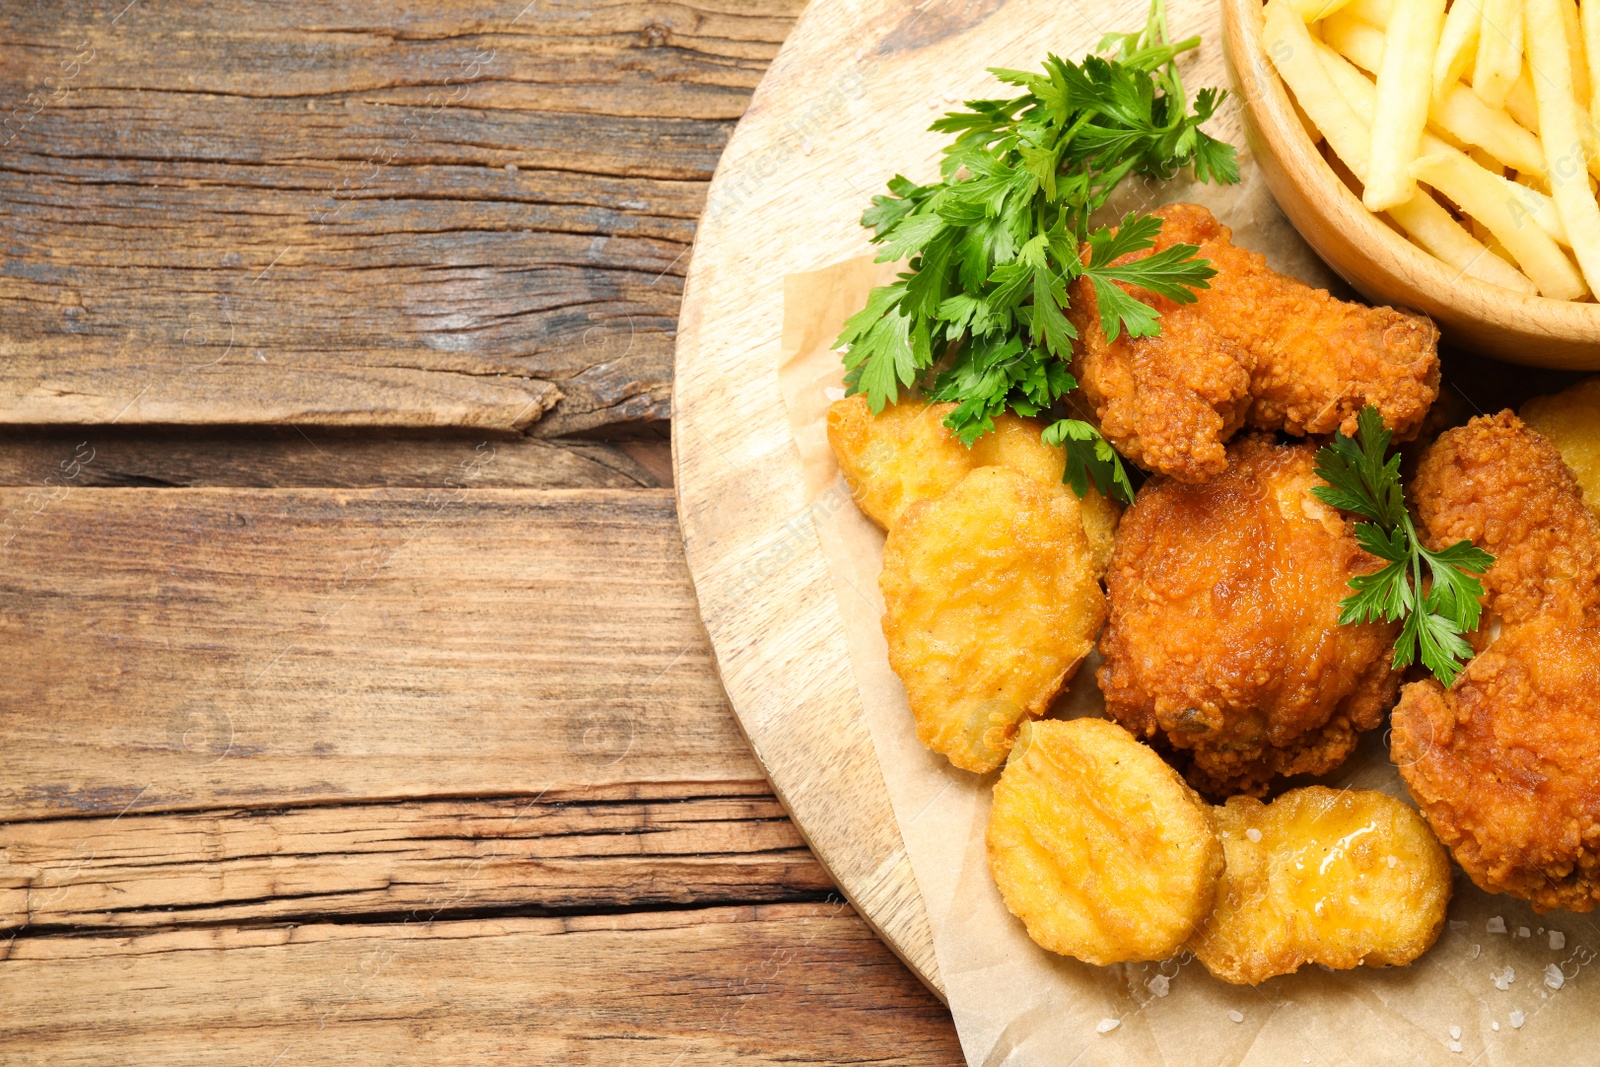 Photo of Tasty nuggets and deep fried chicken pieces with garnish on wooden table, top view. Space for text